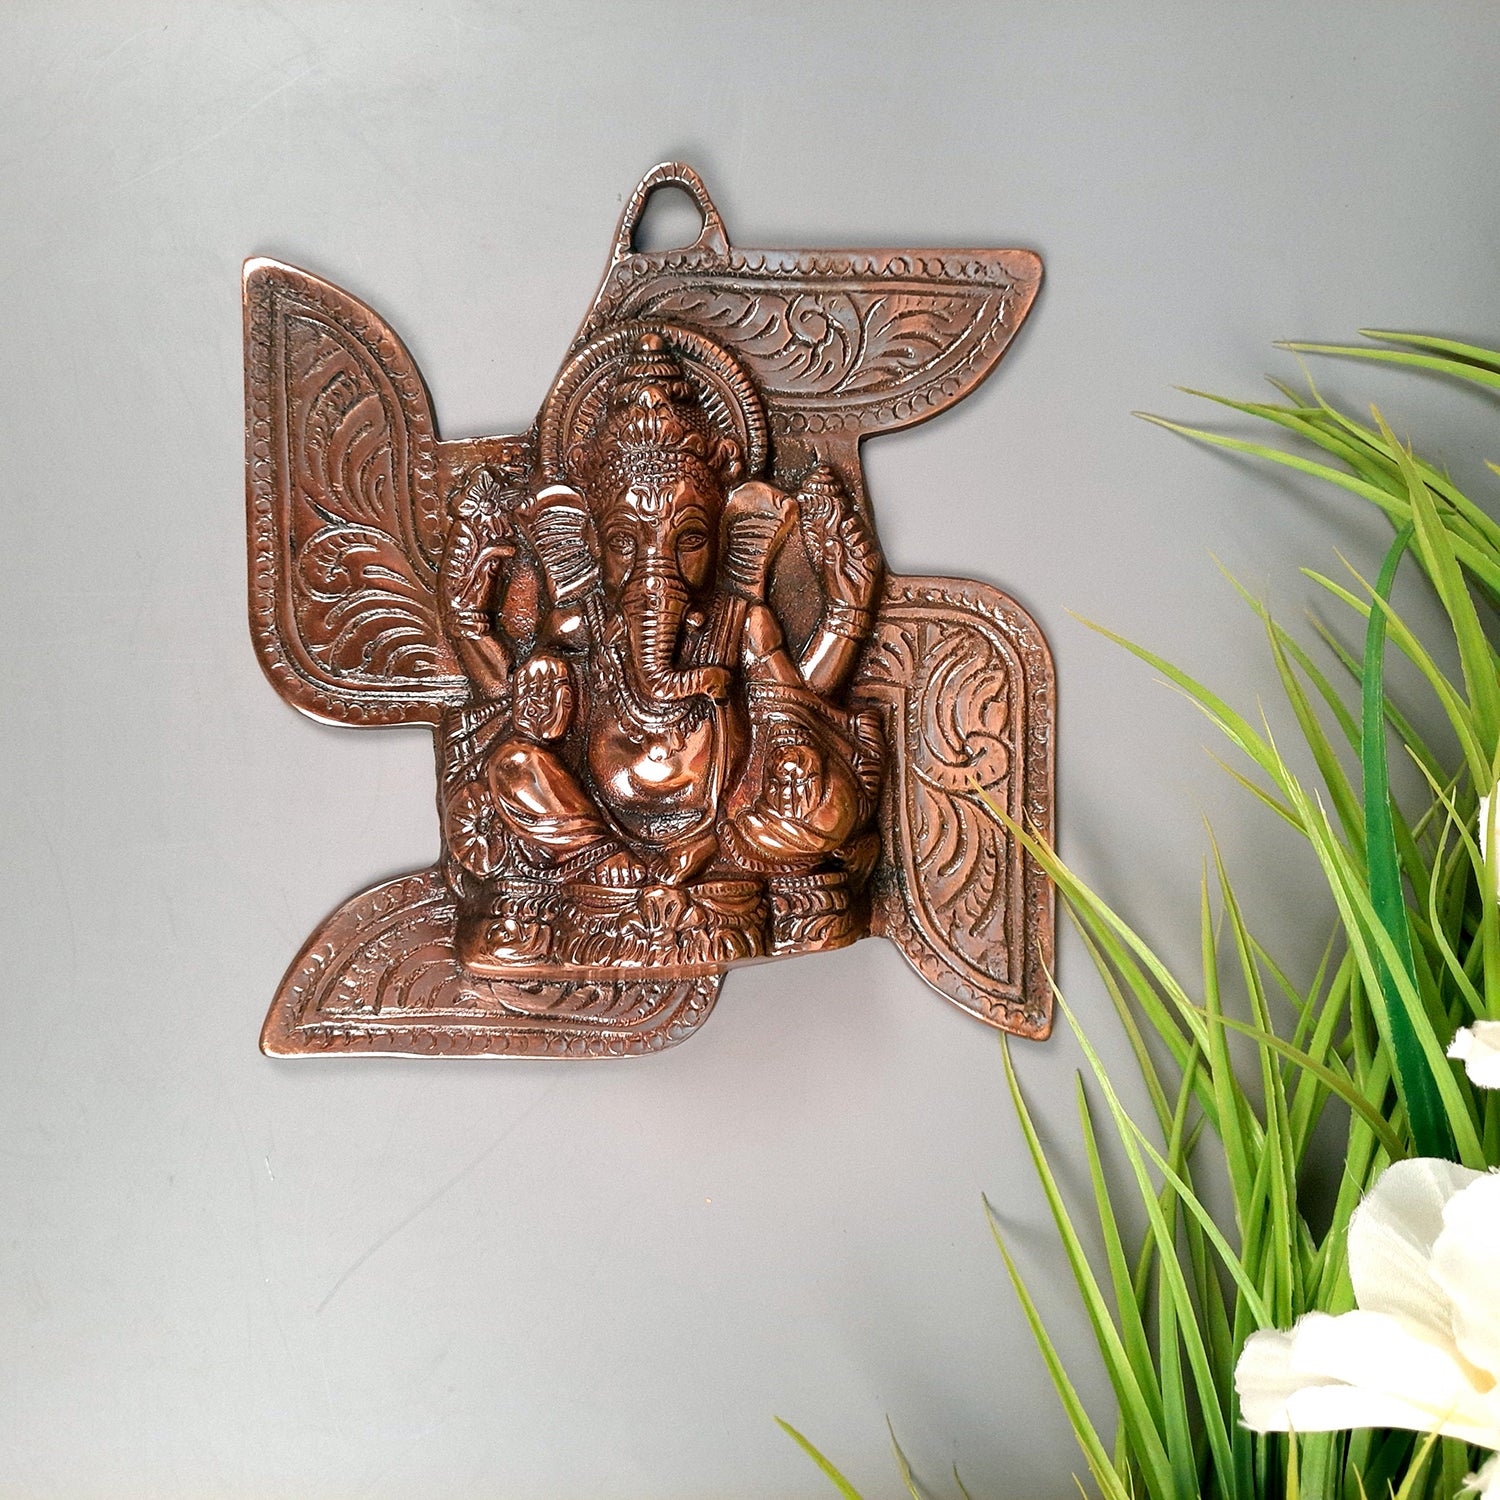 Ganesh Idol Wall Hanging | Lord Ganesha With Swastik Wall Statue Decor - For Puja, Home, Entrance, Living Room & Gift - 8 Inch - Apkamart